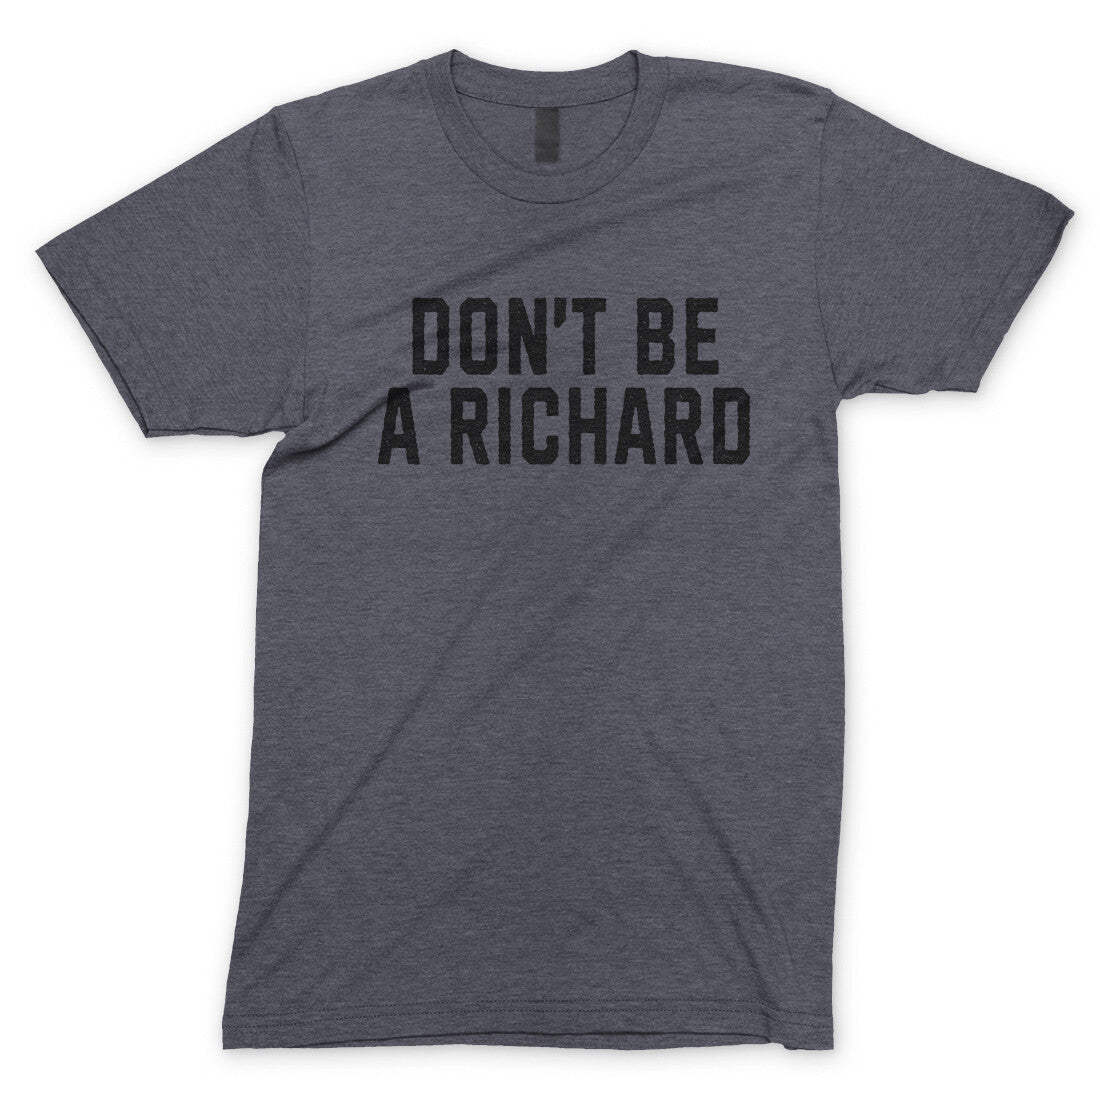 Don't Be a Richard in Dark Heather Color